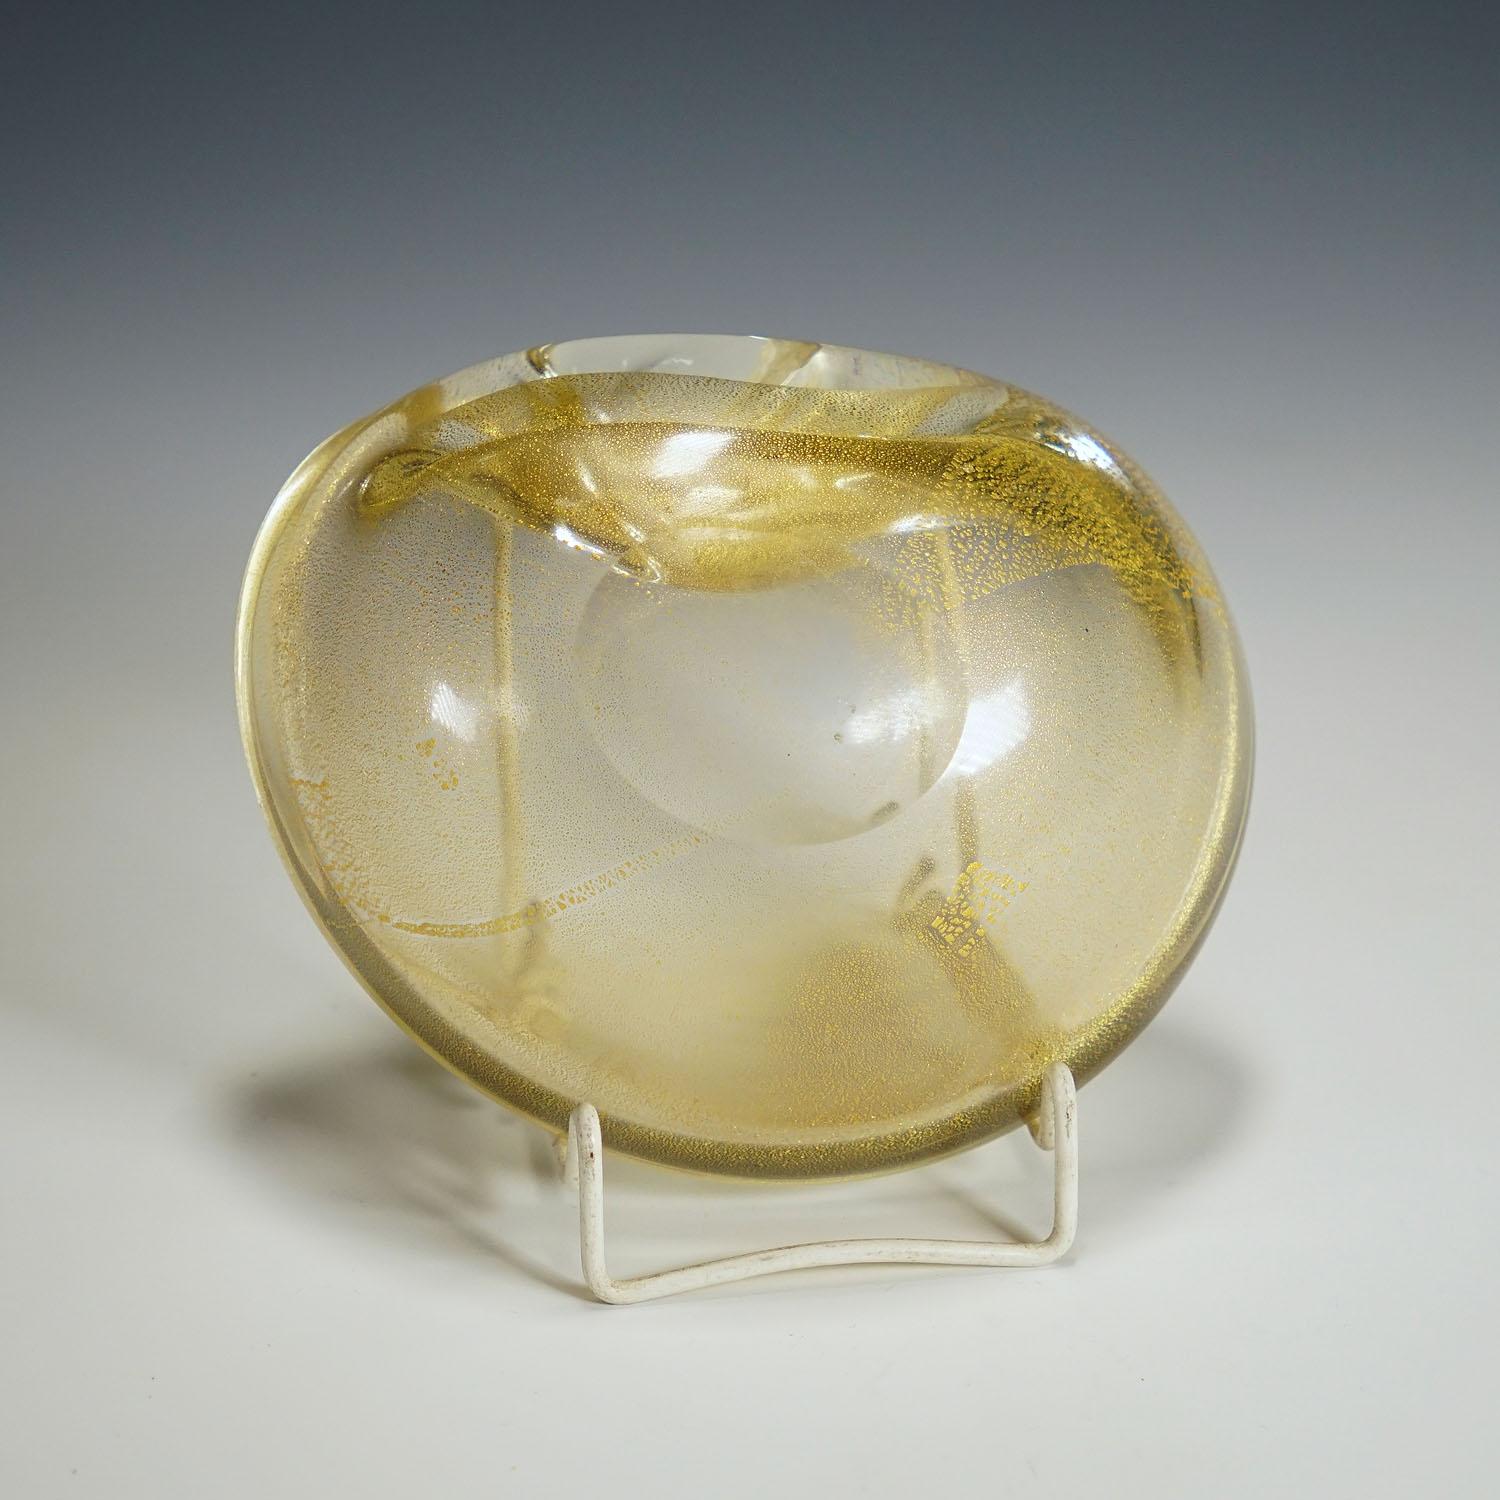 20th Century Vintage Art Glass Bowl with Gold Foil, Murano, Italy, 1950s For Sale